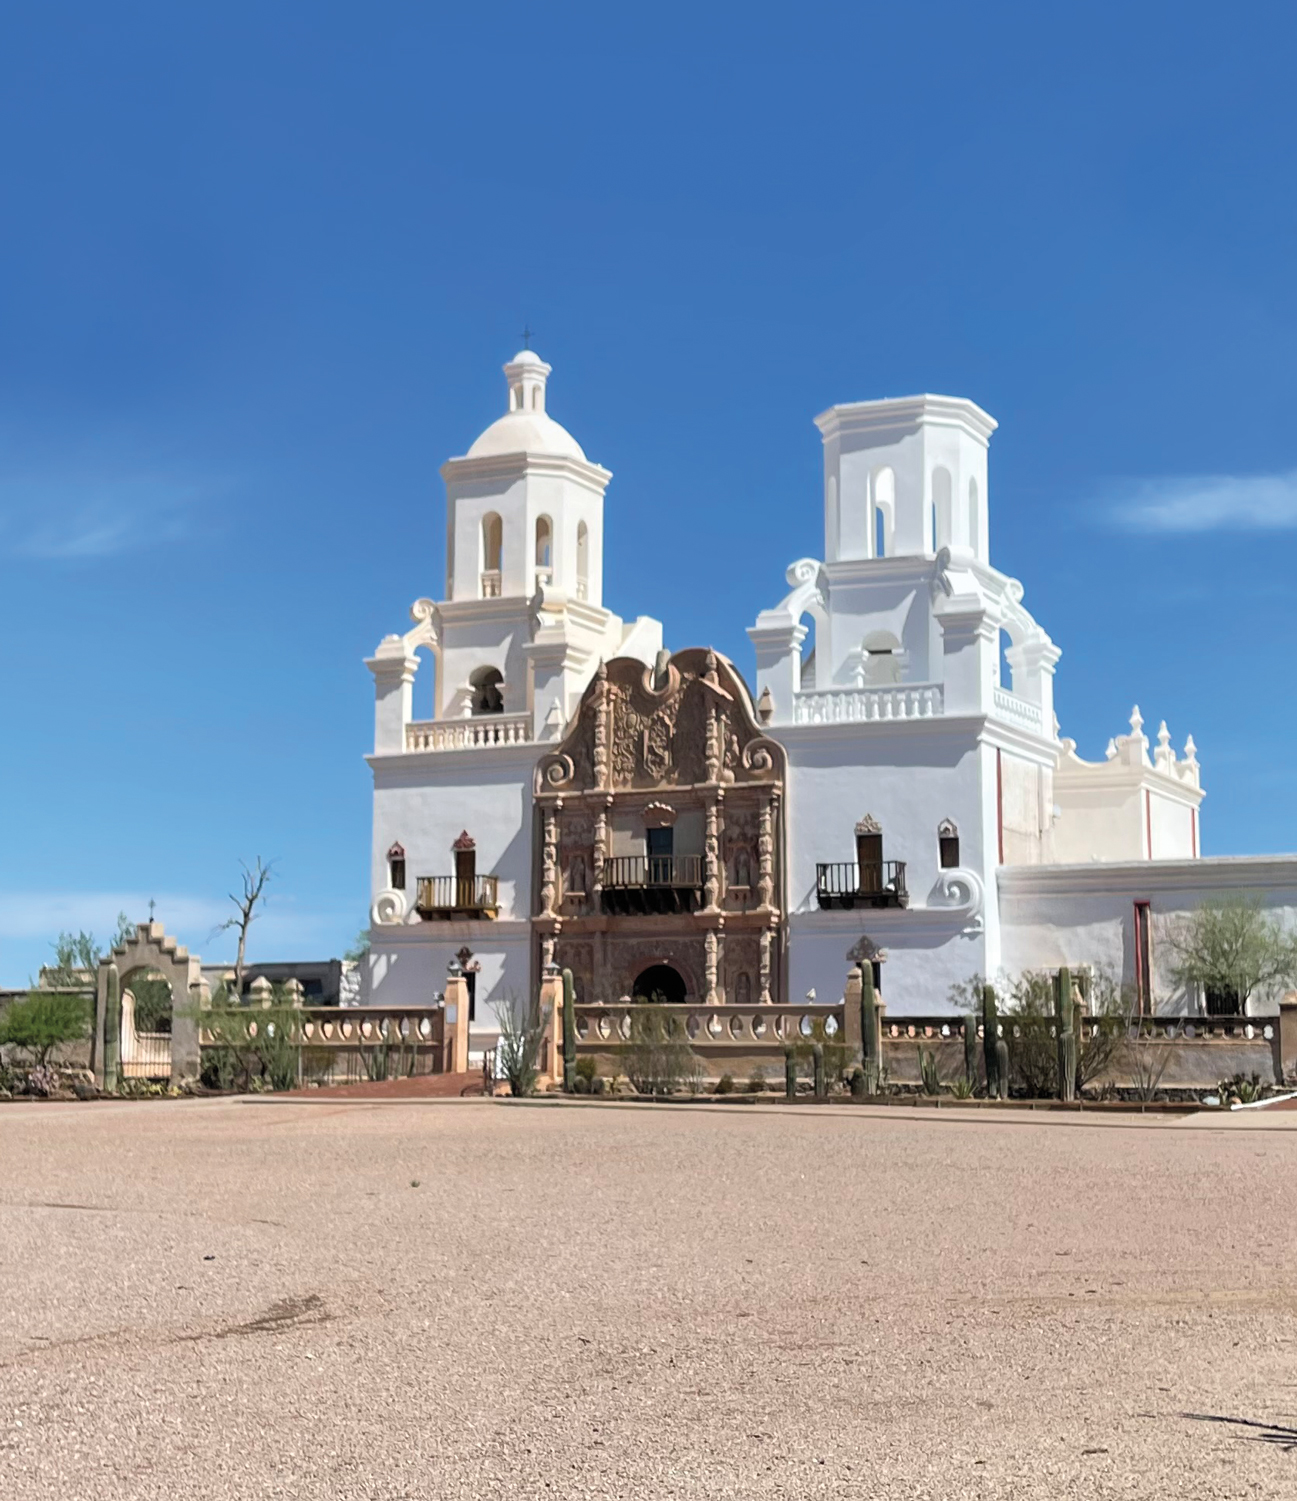 Old Spanish mission with white and brown facade against a clear blue sky, suggested by Arizona design pros